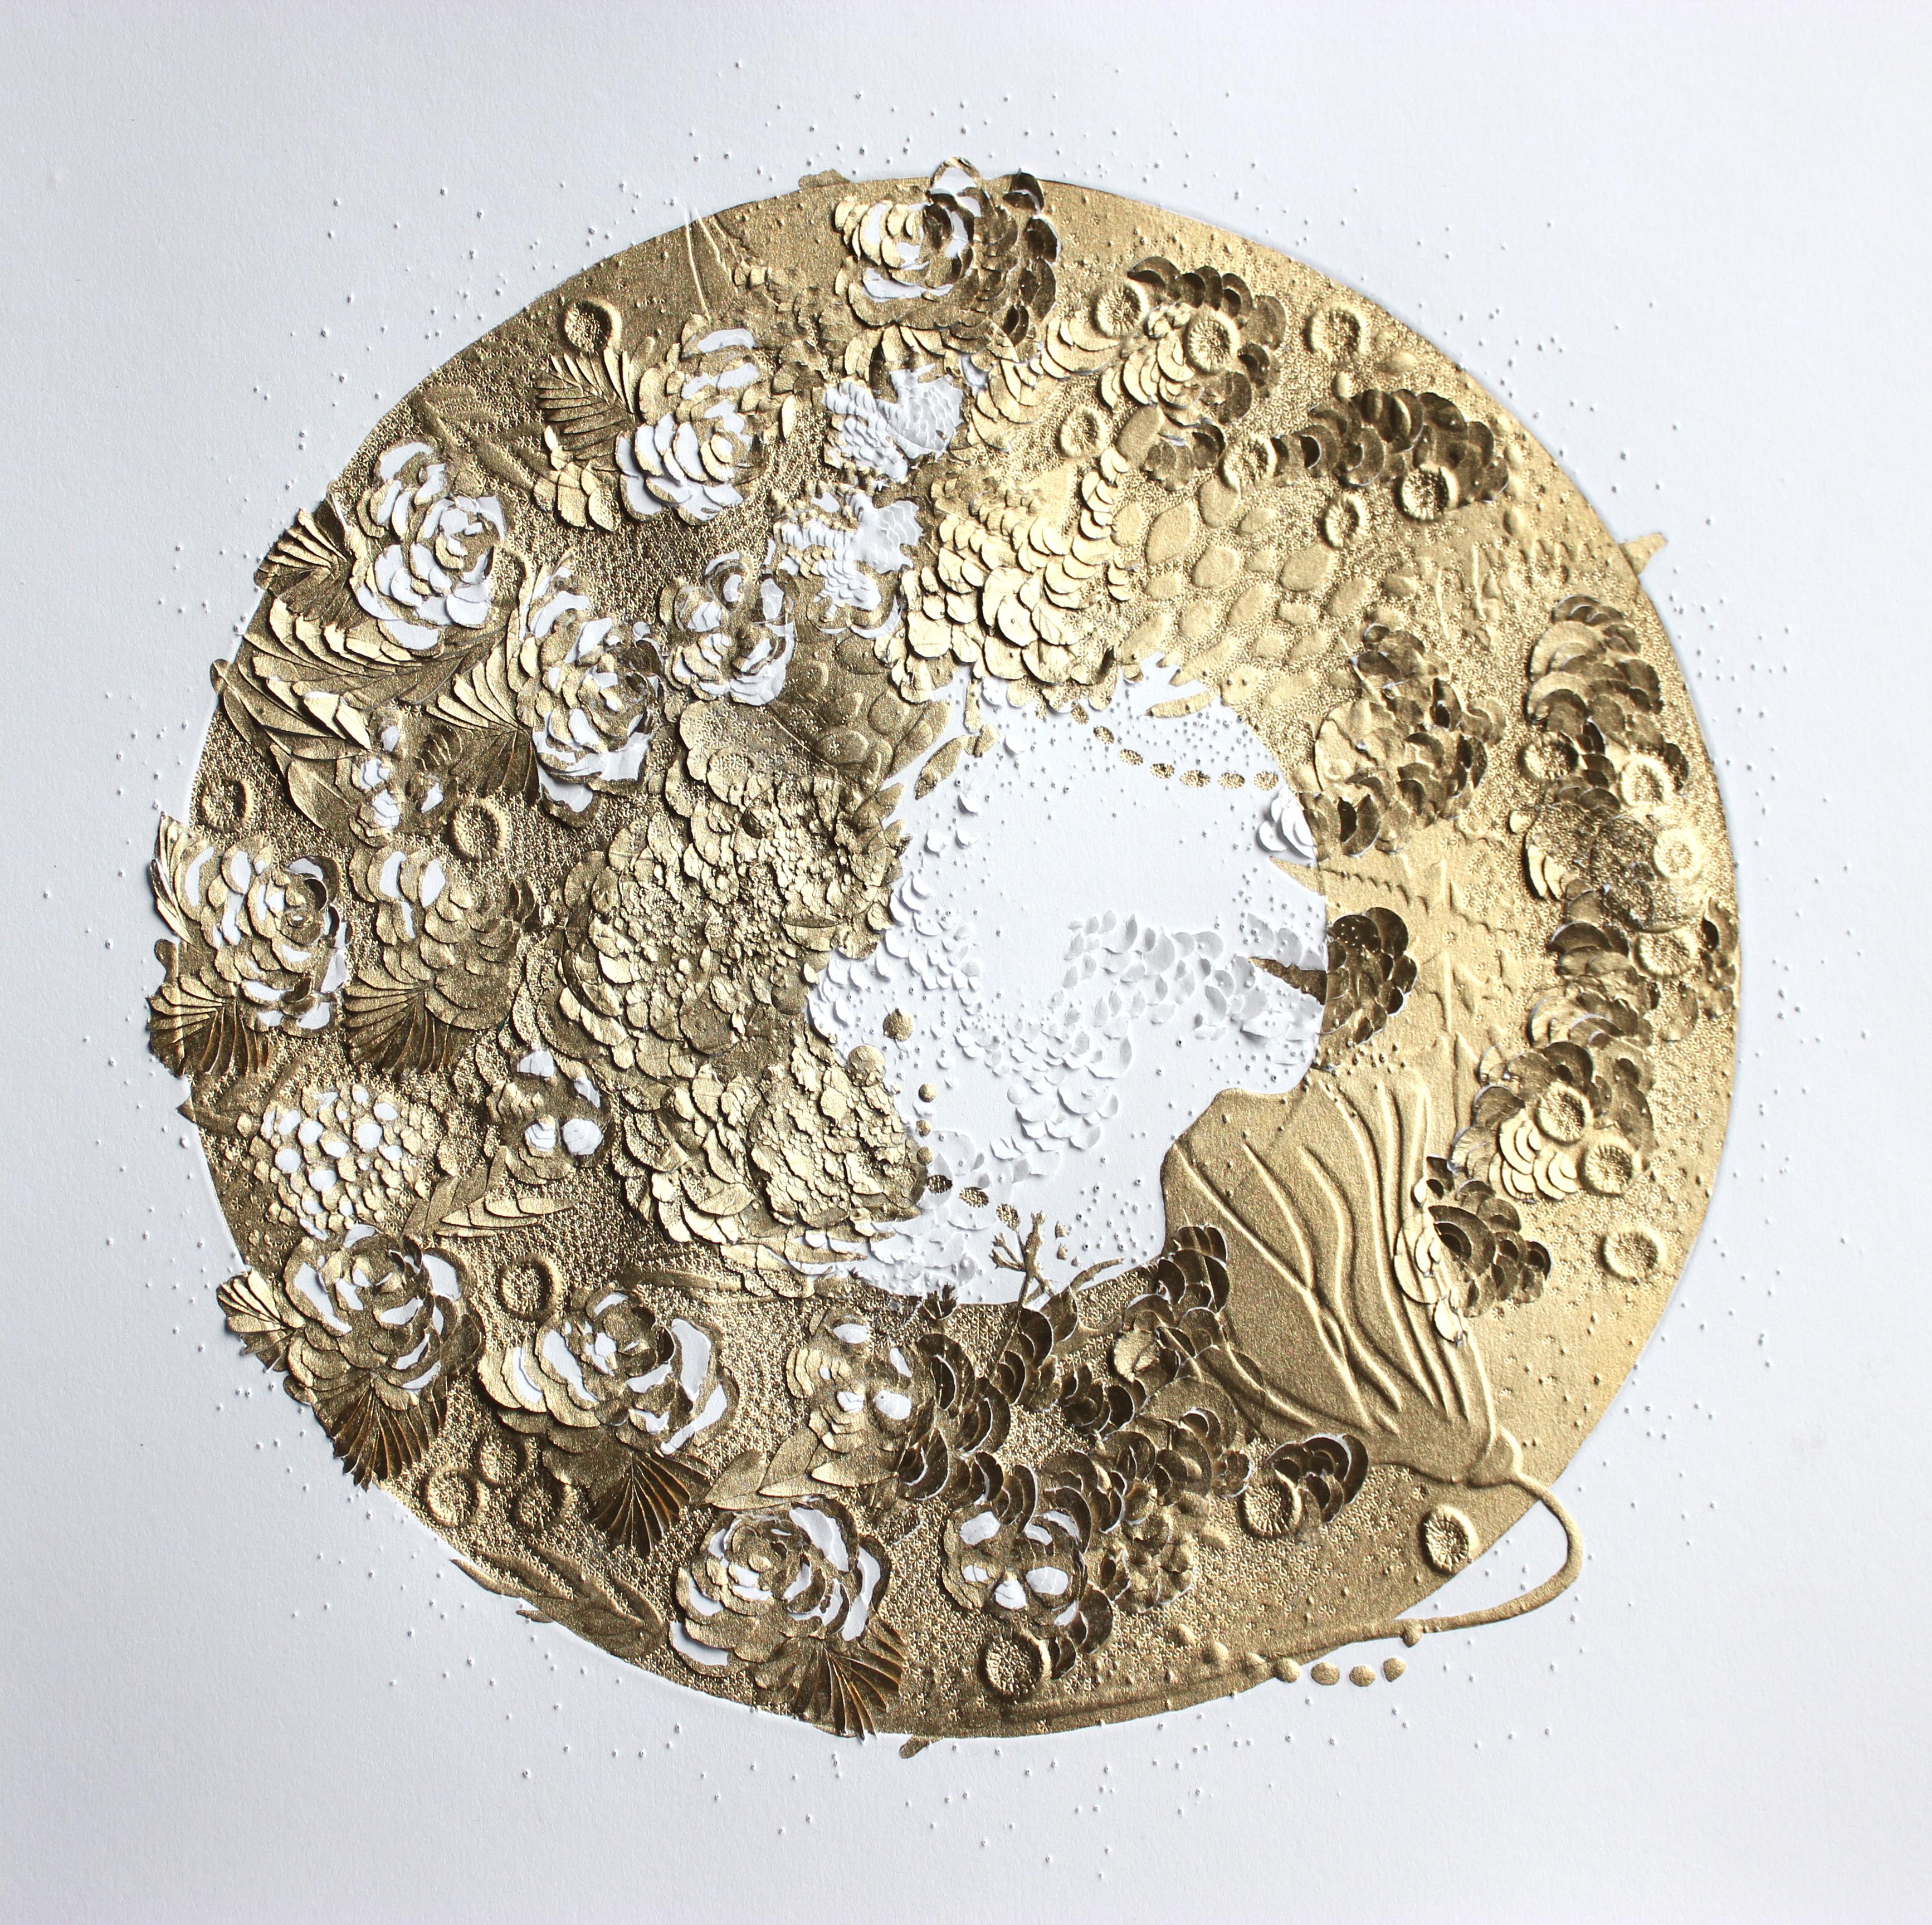 Gold bubble 5 - round textural abstract nature inspired 3D sculpted paper